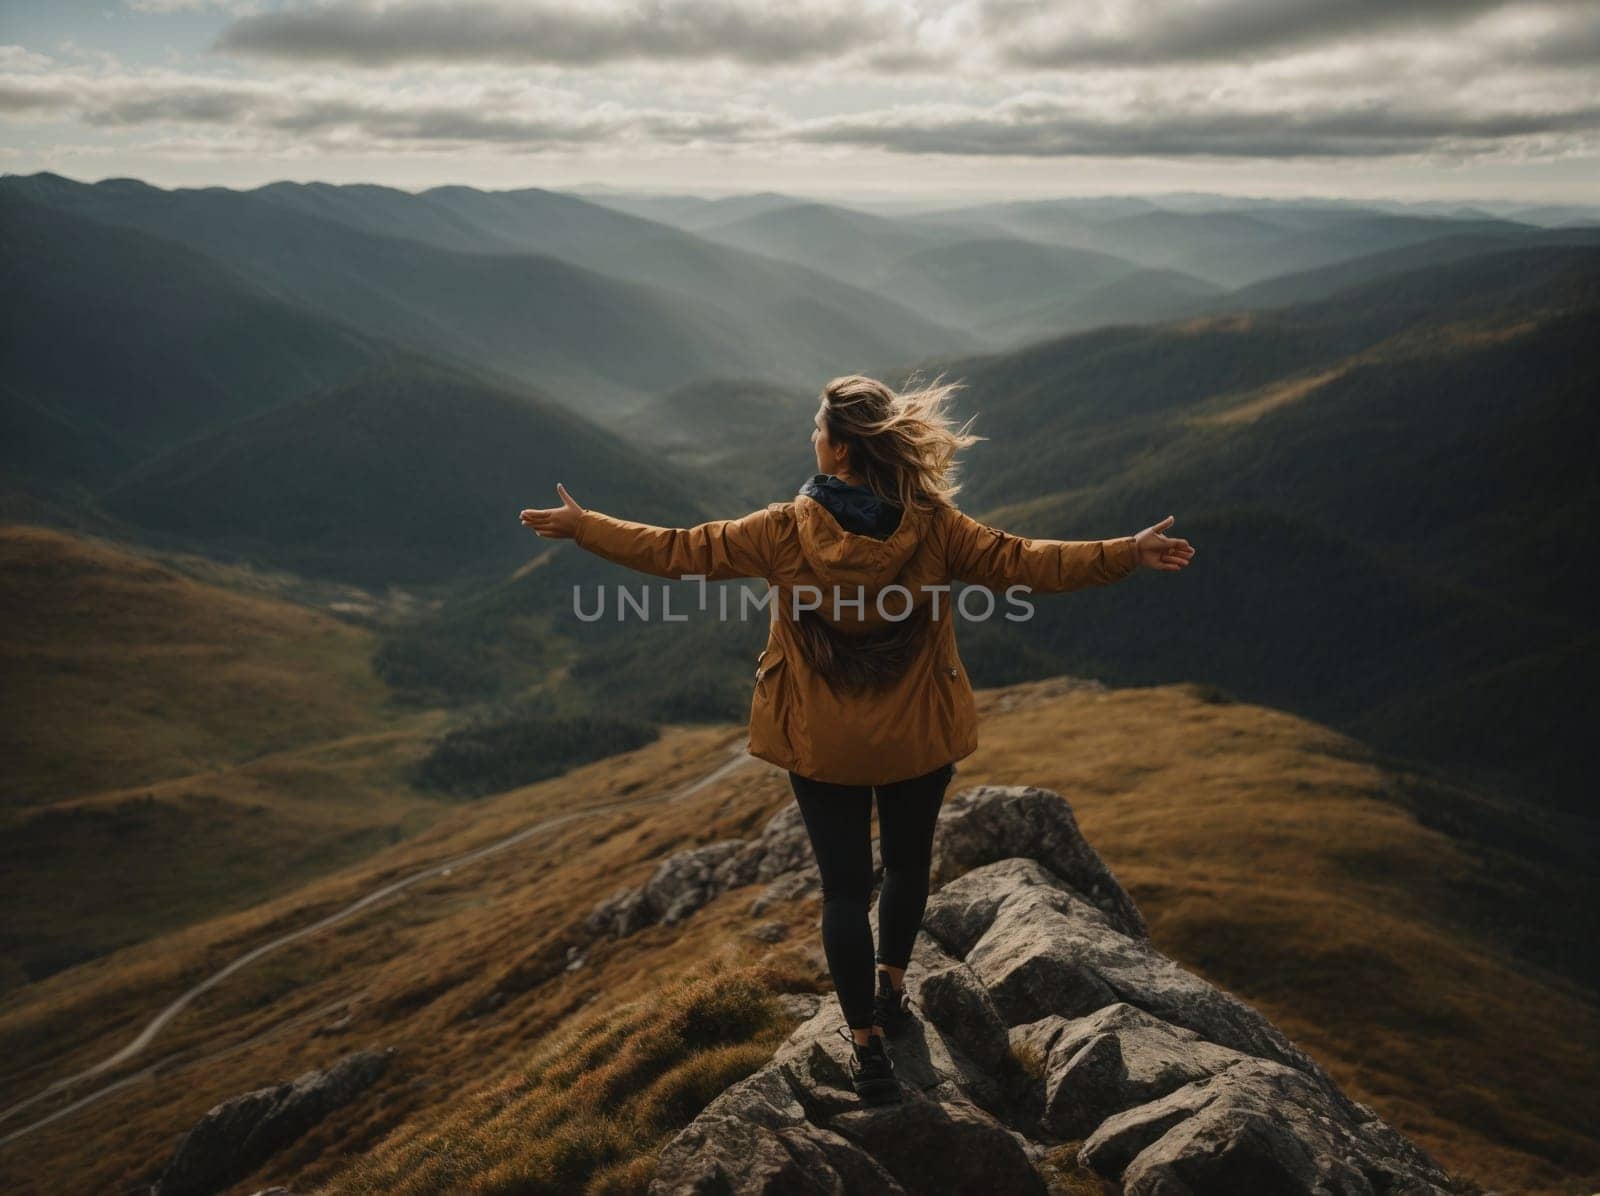 A woman stands triumphantly on the peak of a mountain, arms spread wide in a gesture of victory.